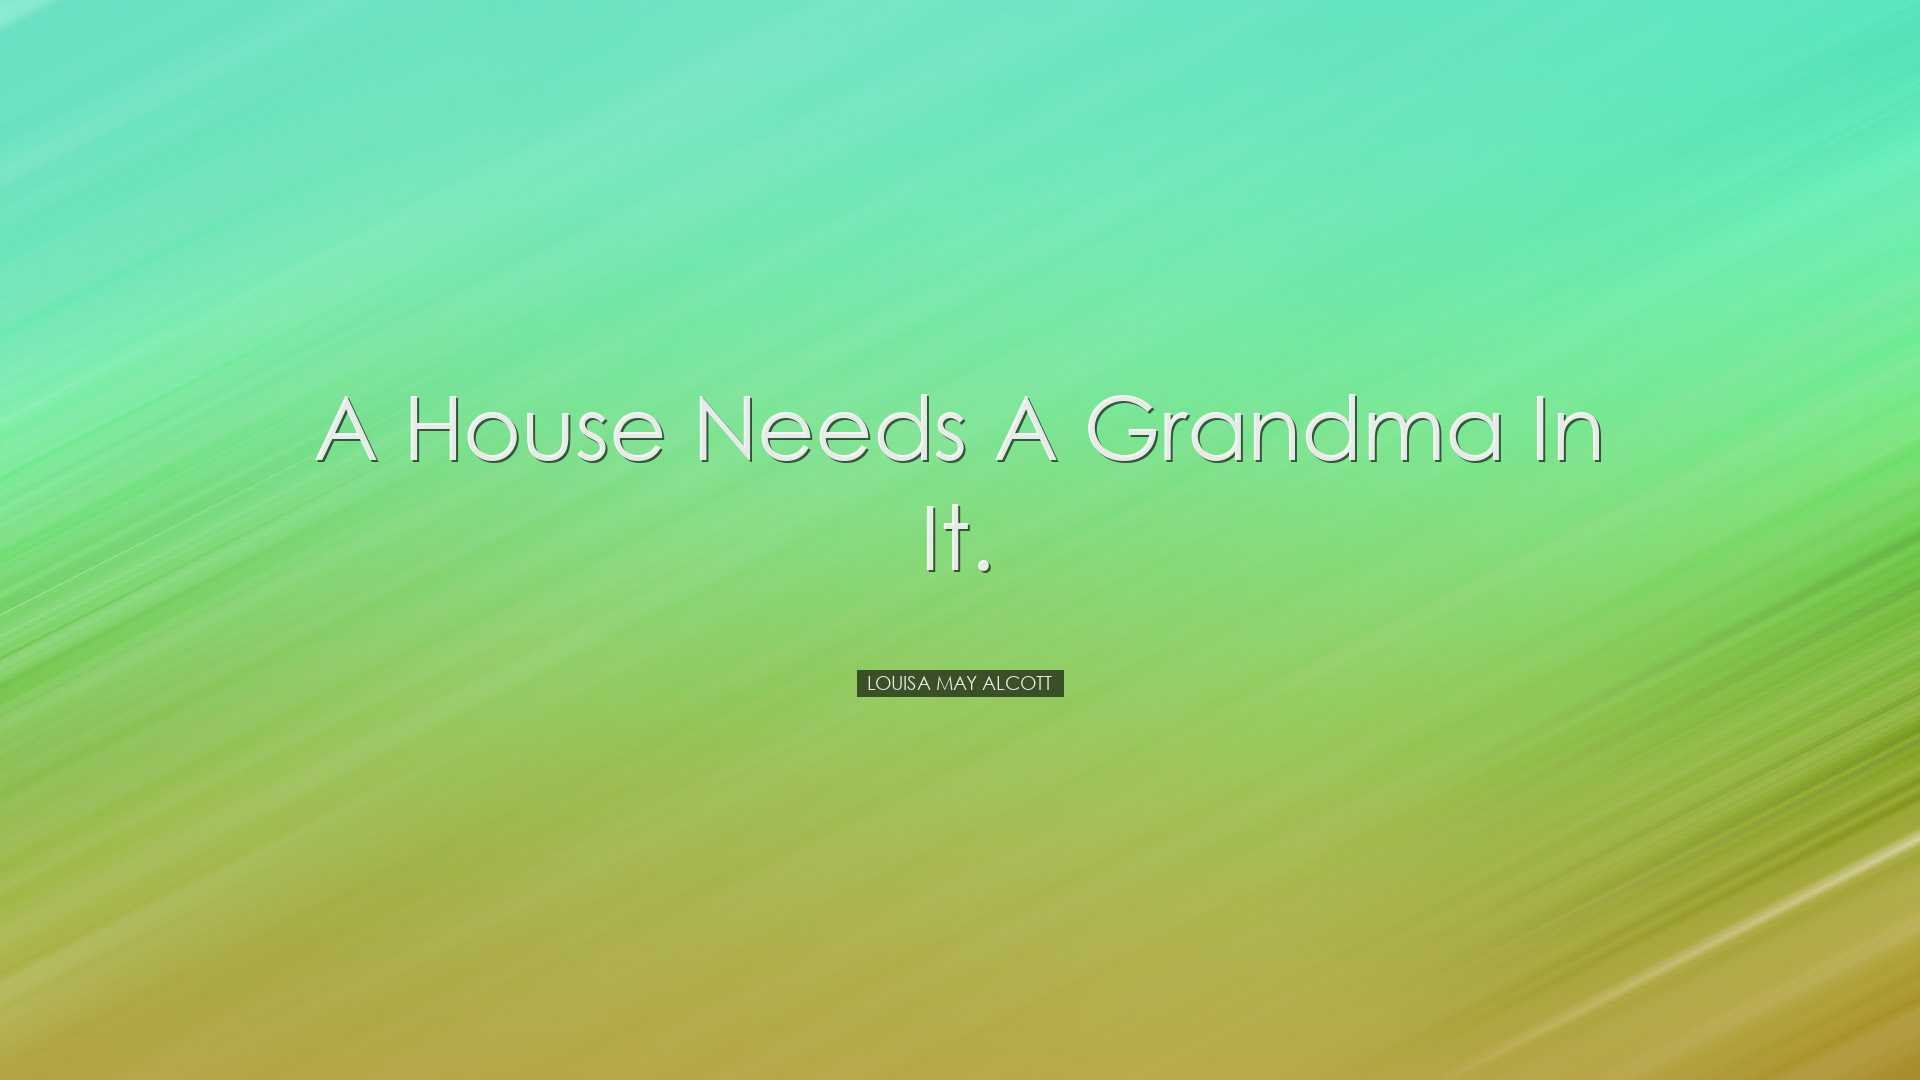 A house needs a grandma in it. - Louisa May Alcott